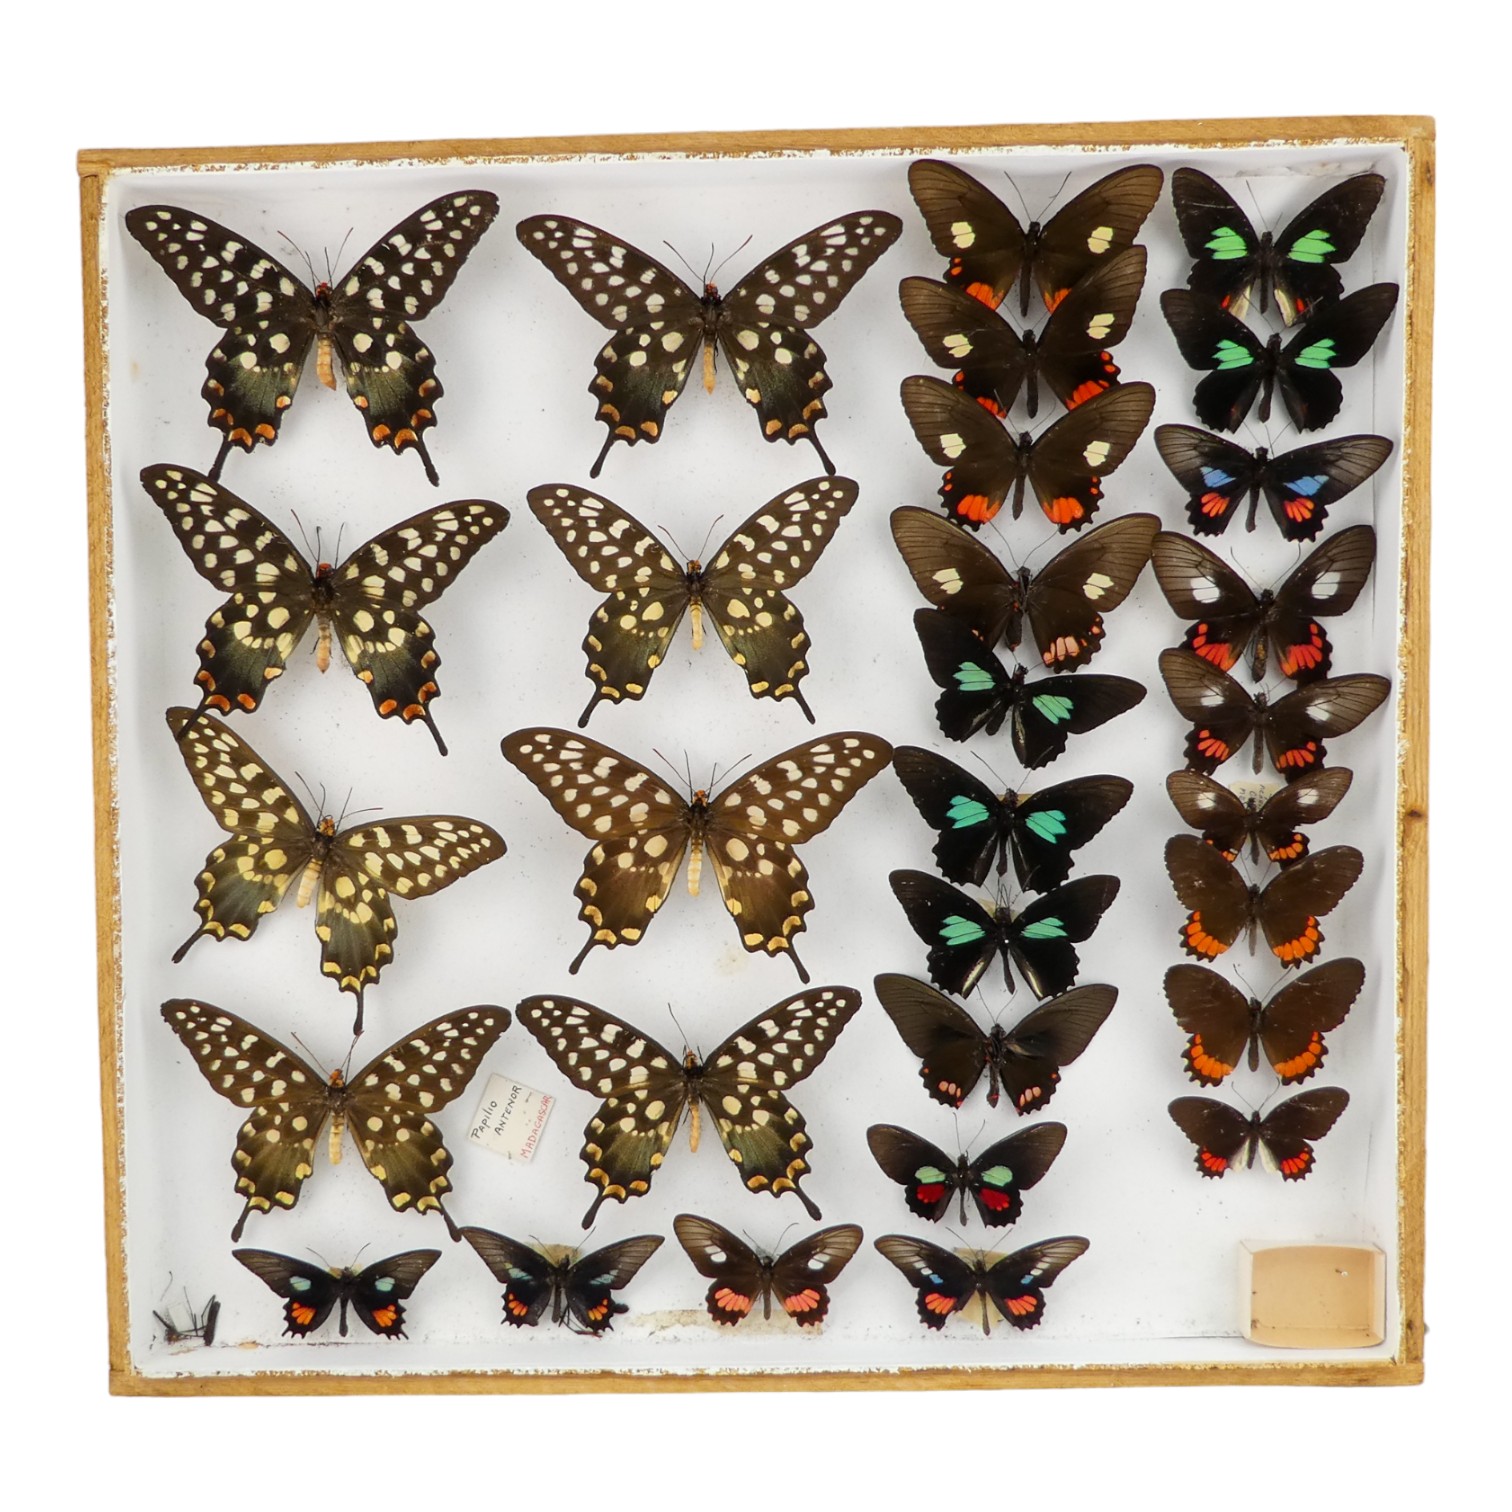 A case of butterflies in four rows - including Tailed Jay and Emerald Patched Cattleheart